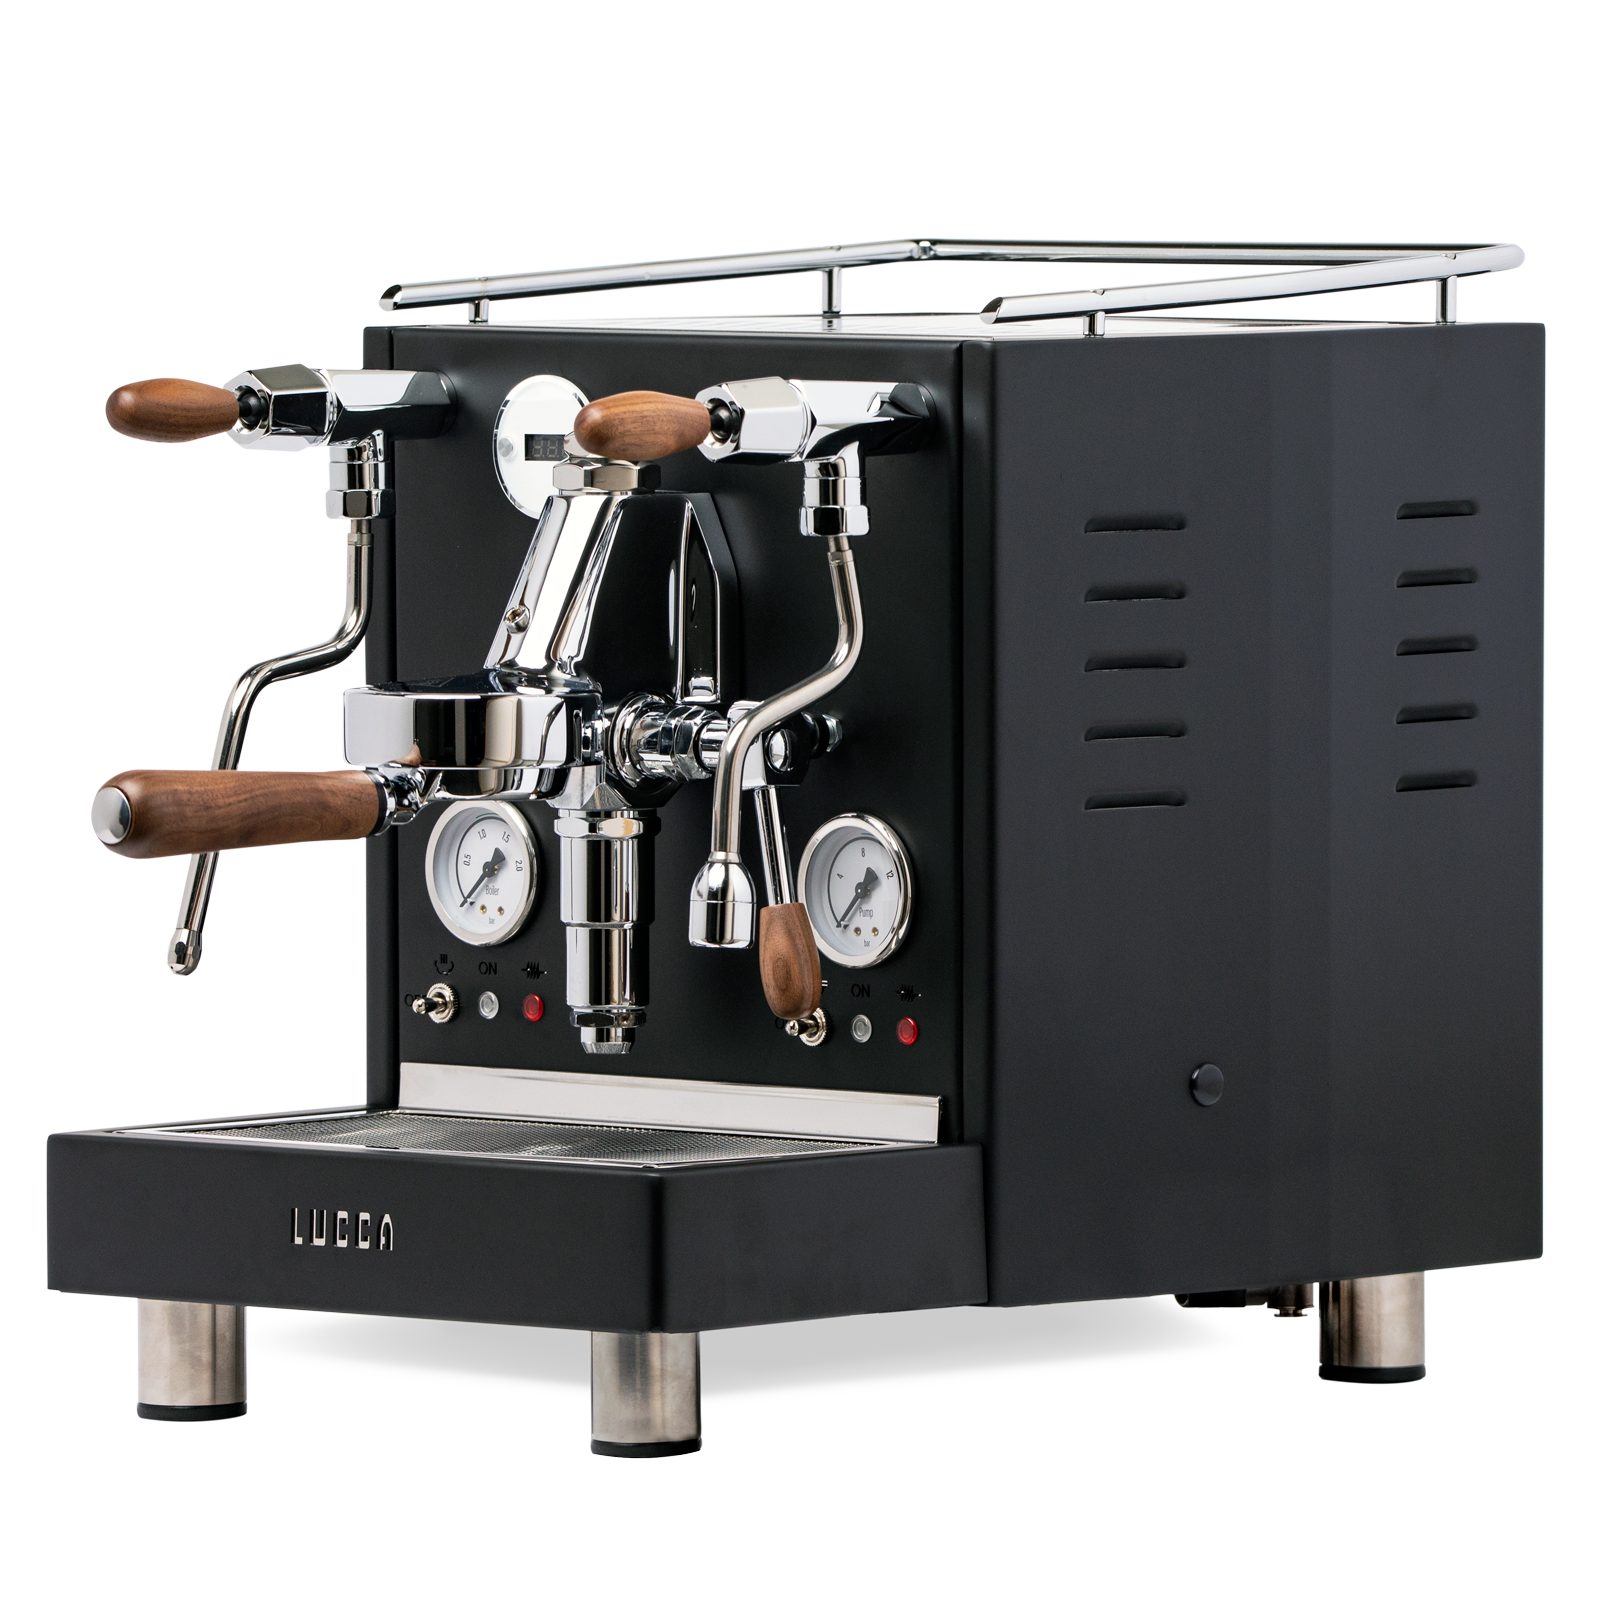 LUCCA M58 Dual Boiler Espresso Machine by Quick Mill with powder coated black panels and accessories from Clive Coffee - Knockout (Matte Black)